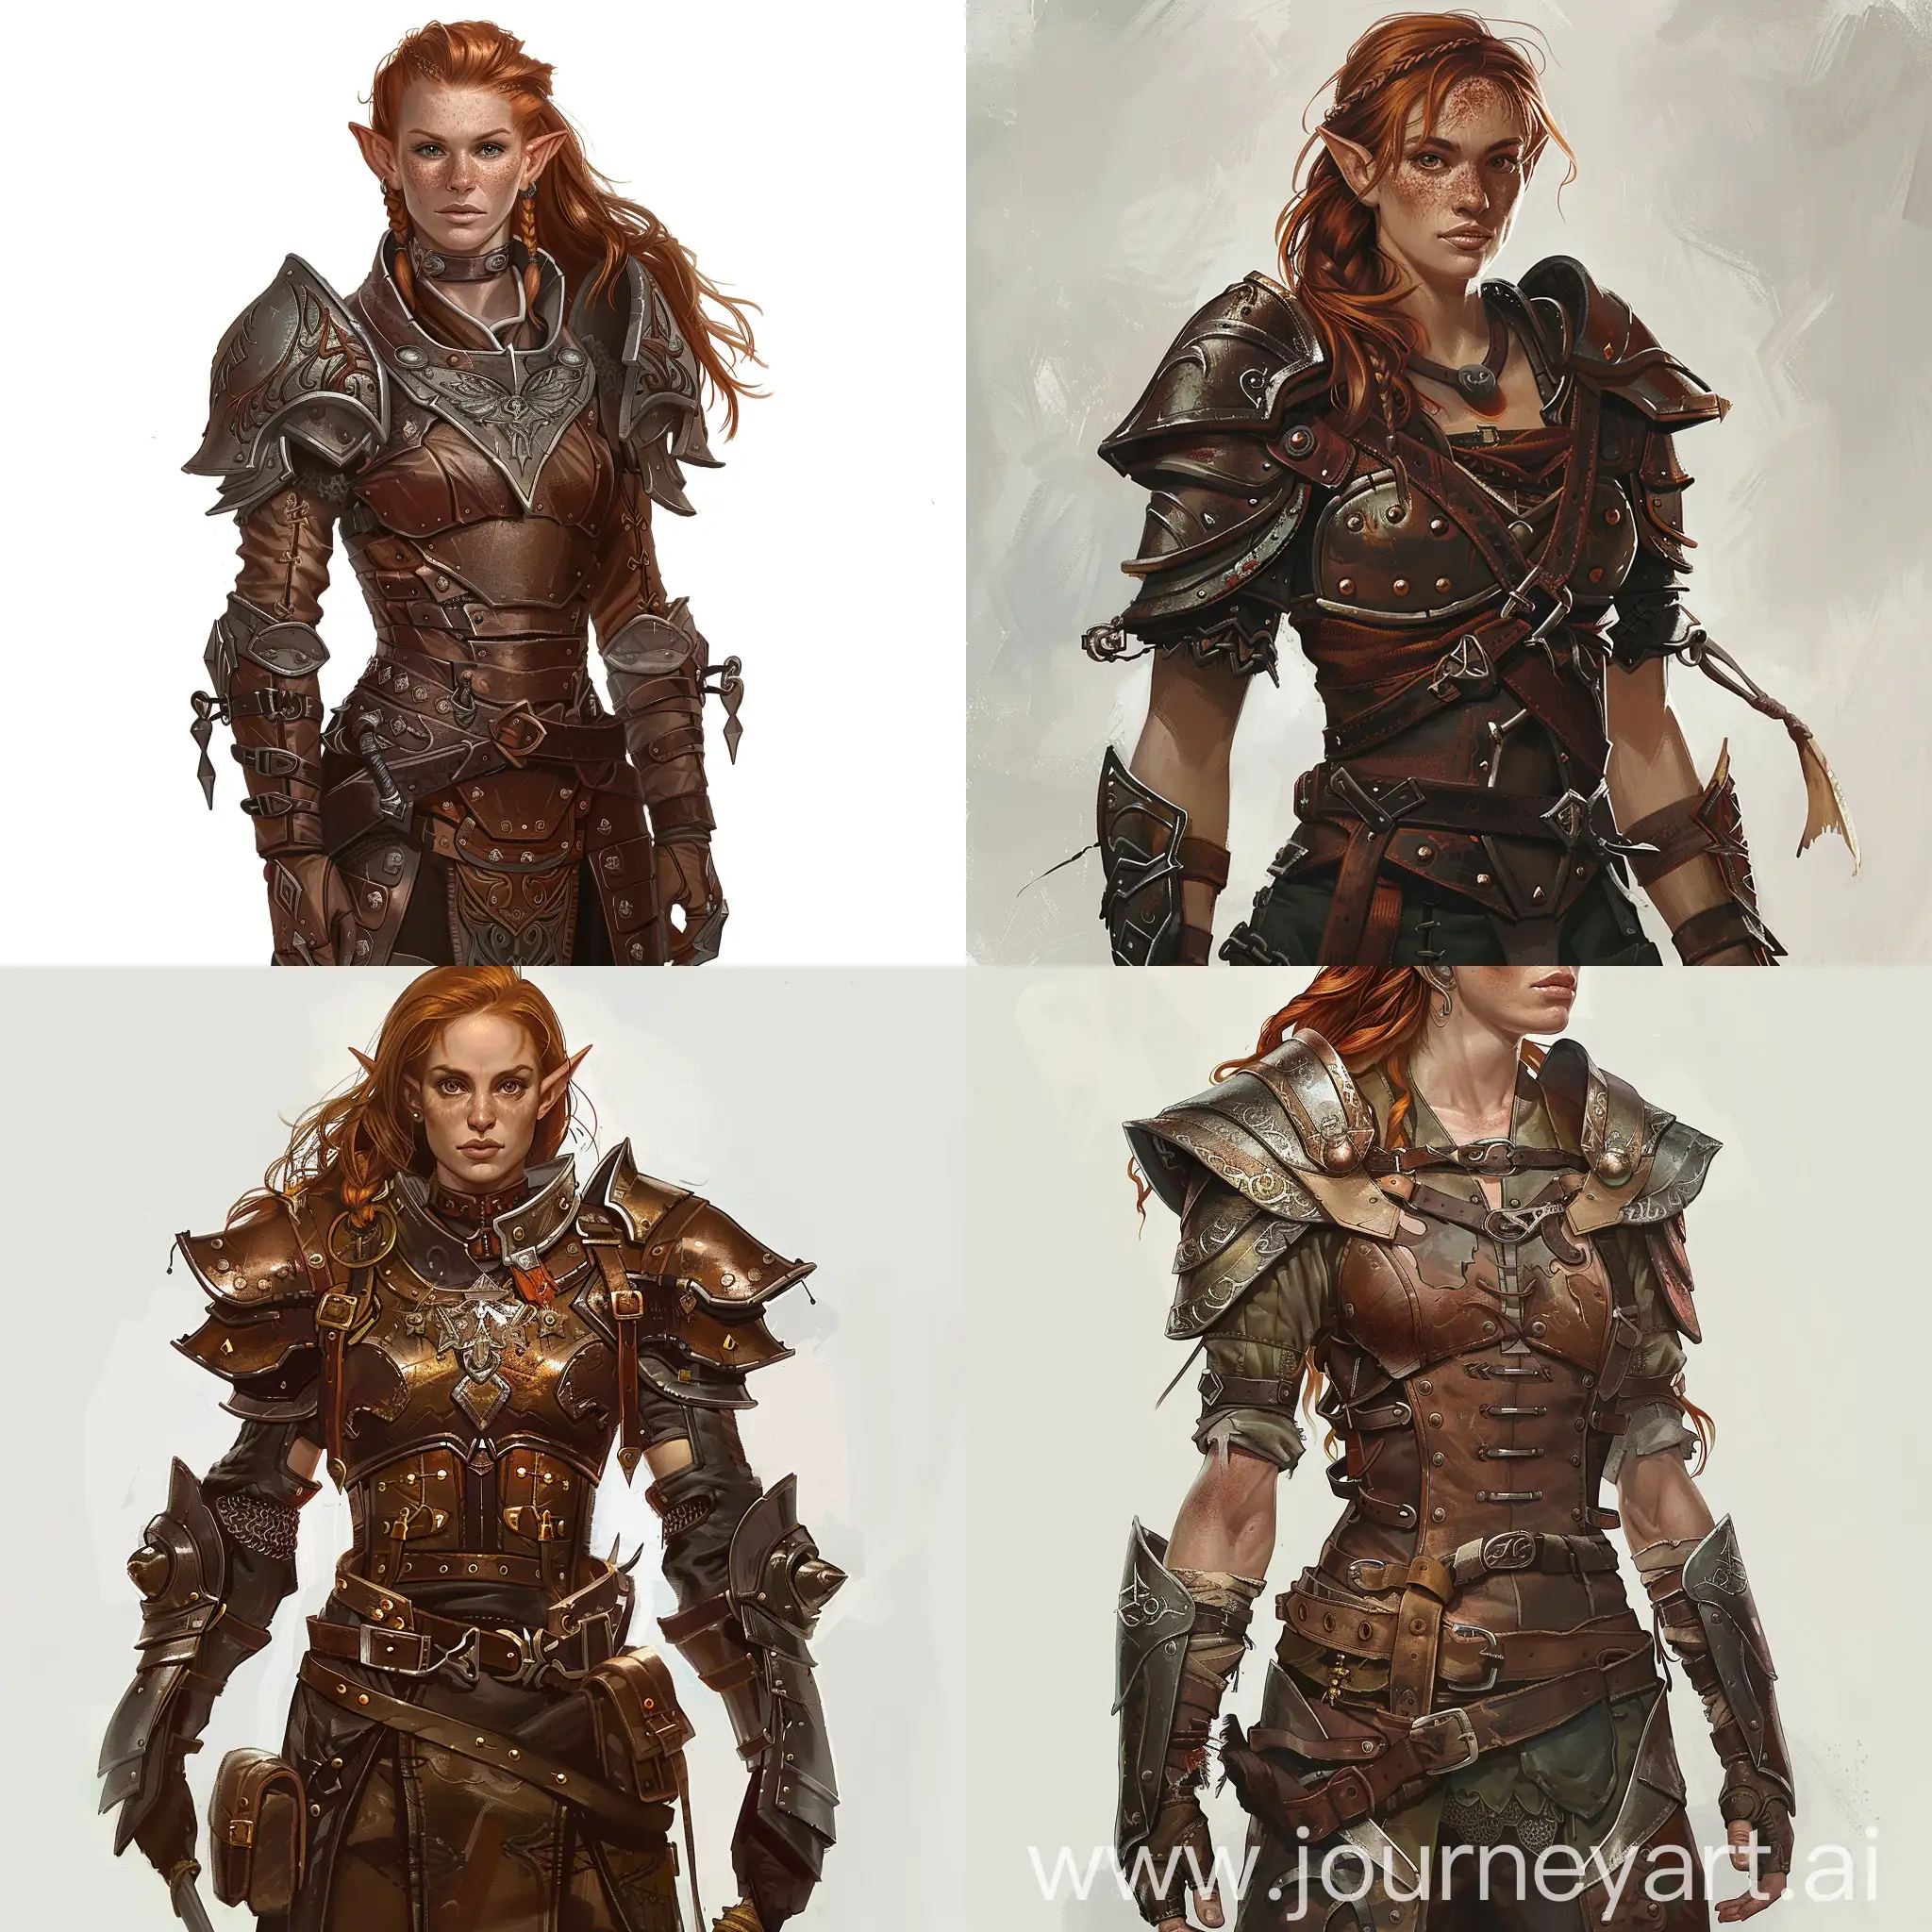 please generate a fantasy illustration of an elven woman, tall and strong, brown skin, ginger hair, heavy leather armor with metal plates